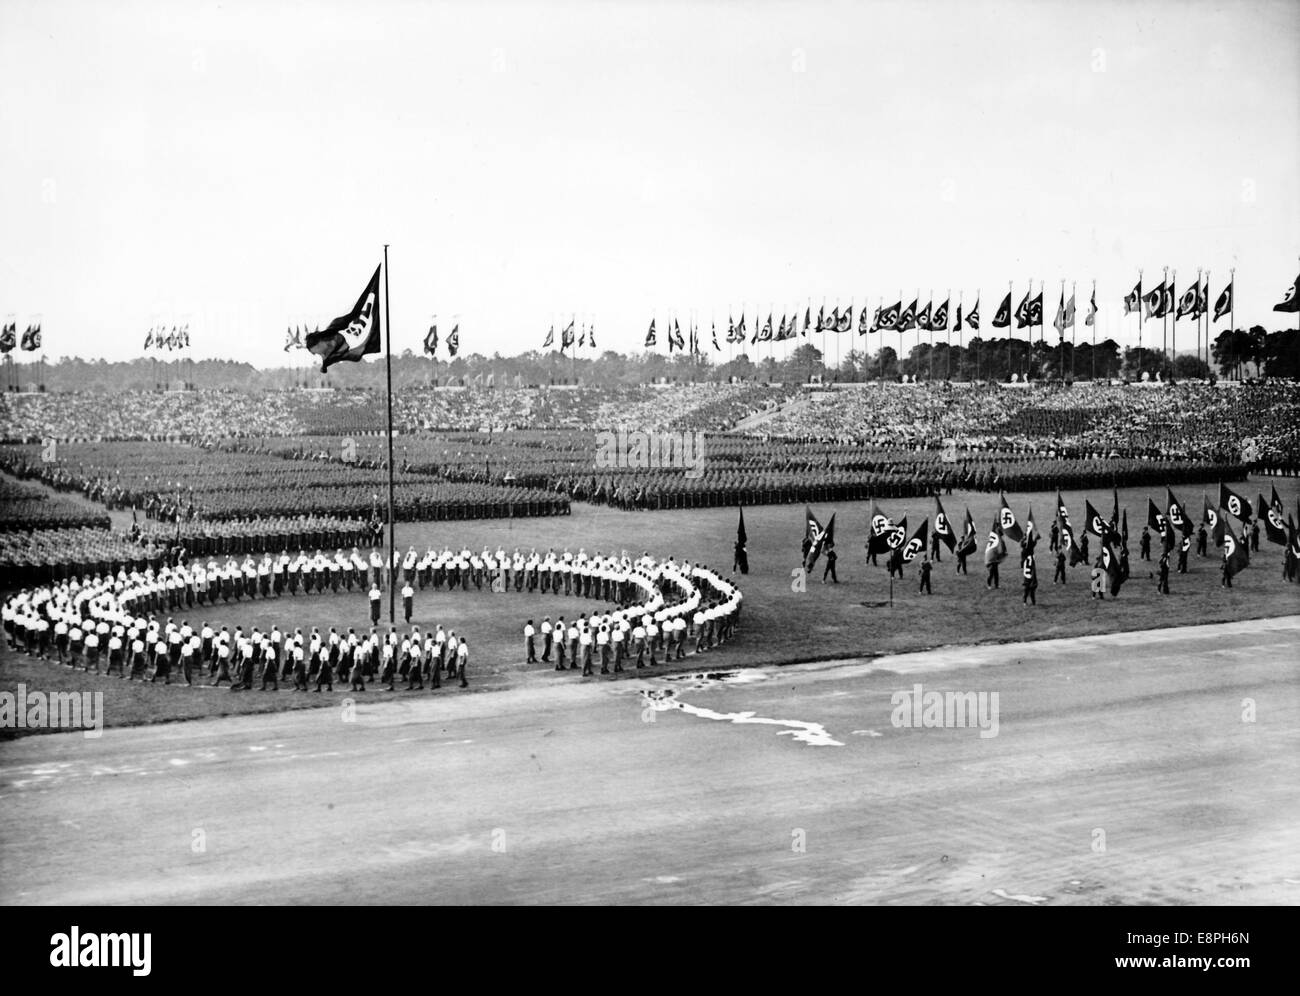 Nuremberg Rally 1937 in Nuremberg, Germany - Roll call of the Reich Labour Service (RAD) in front of the grandstand at Zeppelin Field on the Nazi party rally grounds - female members of the RAD have formed a circle. (Flaws in quality due to the historic picture copy) Fotoarchiv für Zeitgeschichtee - NO WIRE SERVICE - Stock Photo